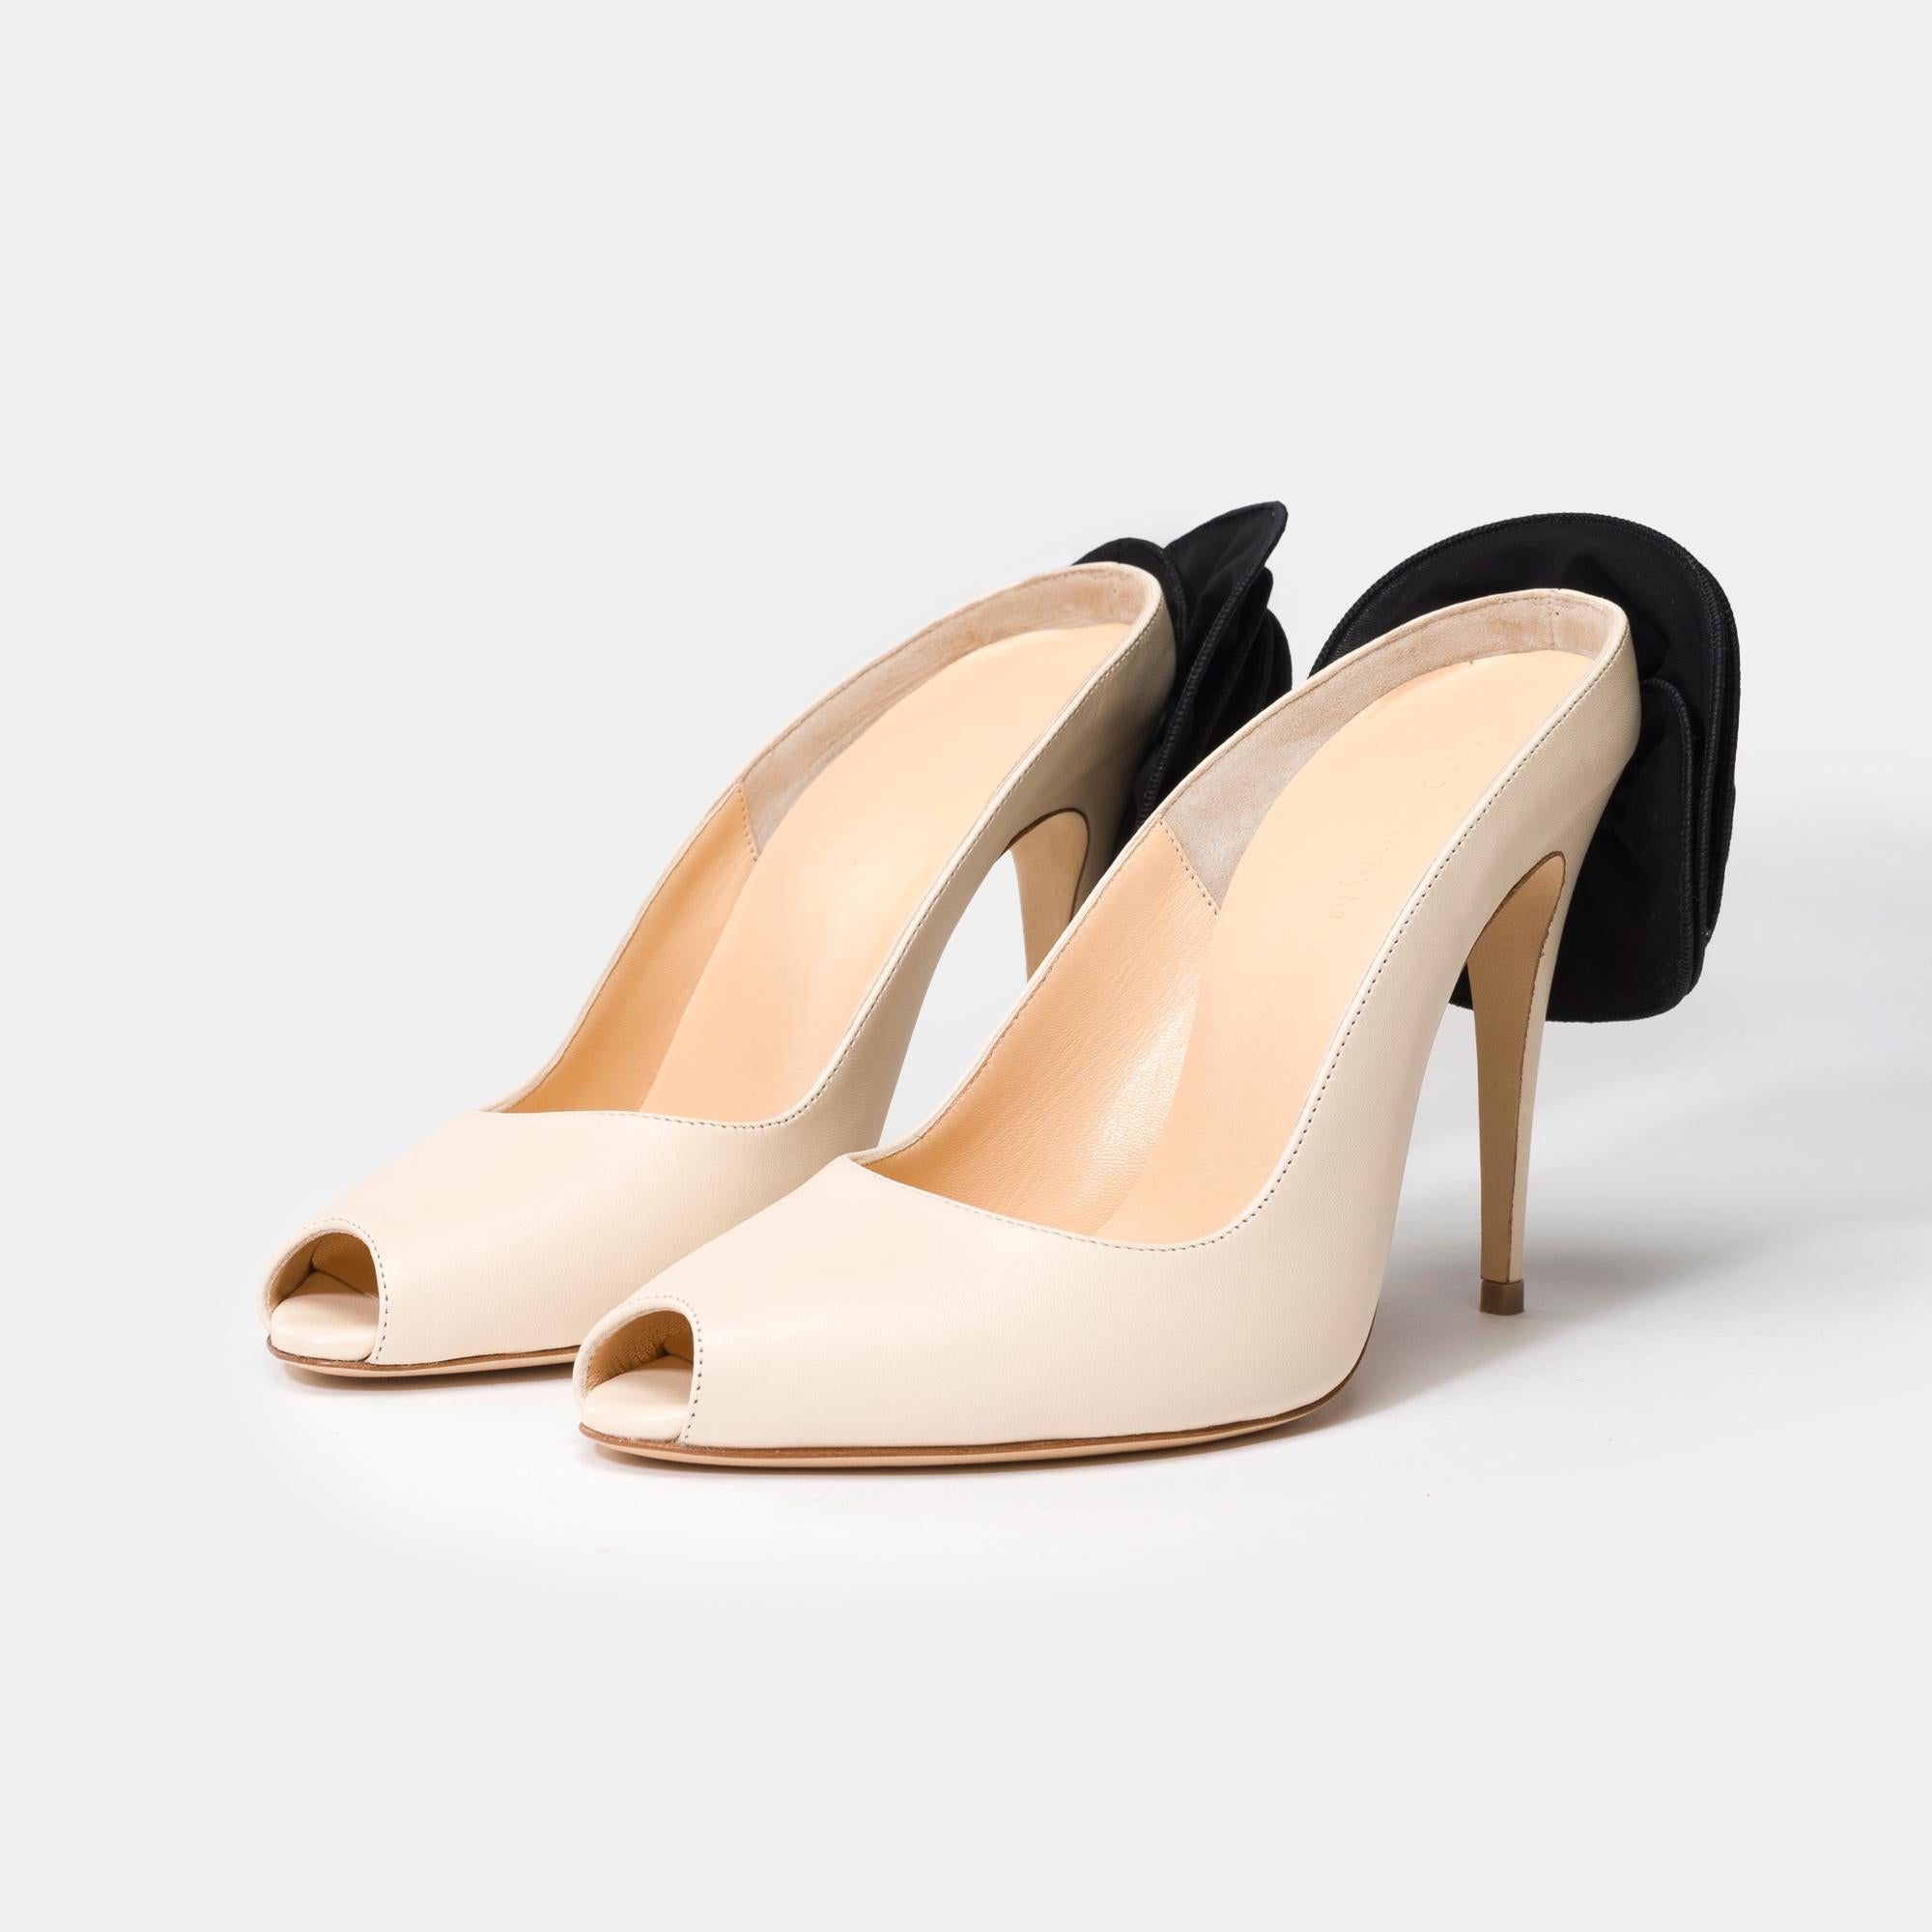 Made​ ​in​ ​Italy,​ ​these​ ​peep​ ​toe​ ​mules​ ​are​ ​set​ ​atop​ ​a​ ​105mm​ ​heel​ ​and​ ​feature​ ​Magda's​ ​signature​ ​3D​ ​flower​ ​at​ ​the​ ​heel
Upper​ ​100%​ ​Calf​ ​Leather.​ ​Insole,​ ​Sole:​ ​100%​ ​Calf​ ​leather.​ ​Flower​ ​100%​